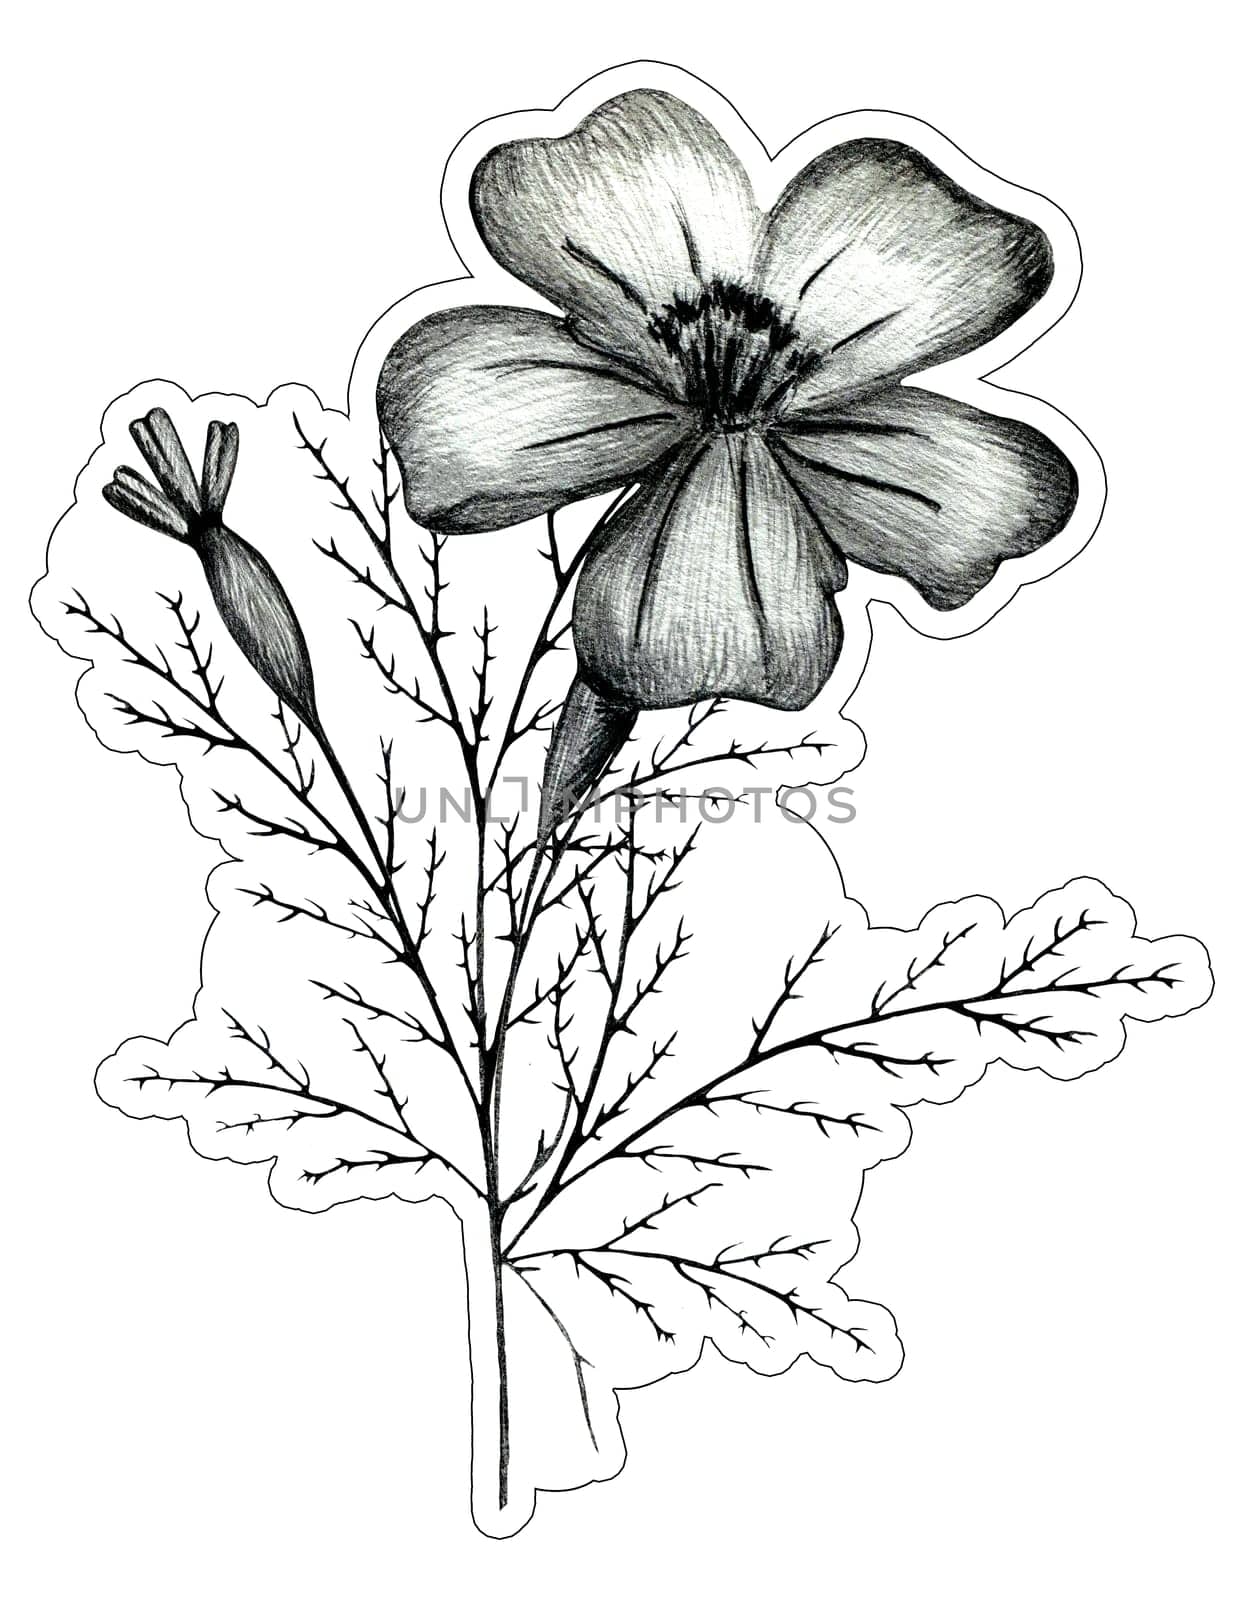 Black and White Hand Drawn Marigold Flower Composition Sticker Isolated on White Background. Marigold Flower Composition Sticker Drawn by Black Pencil.